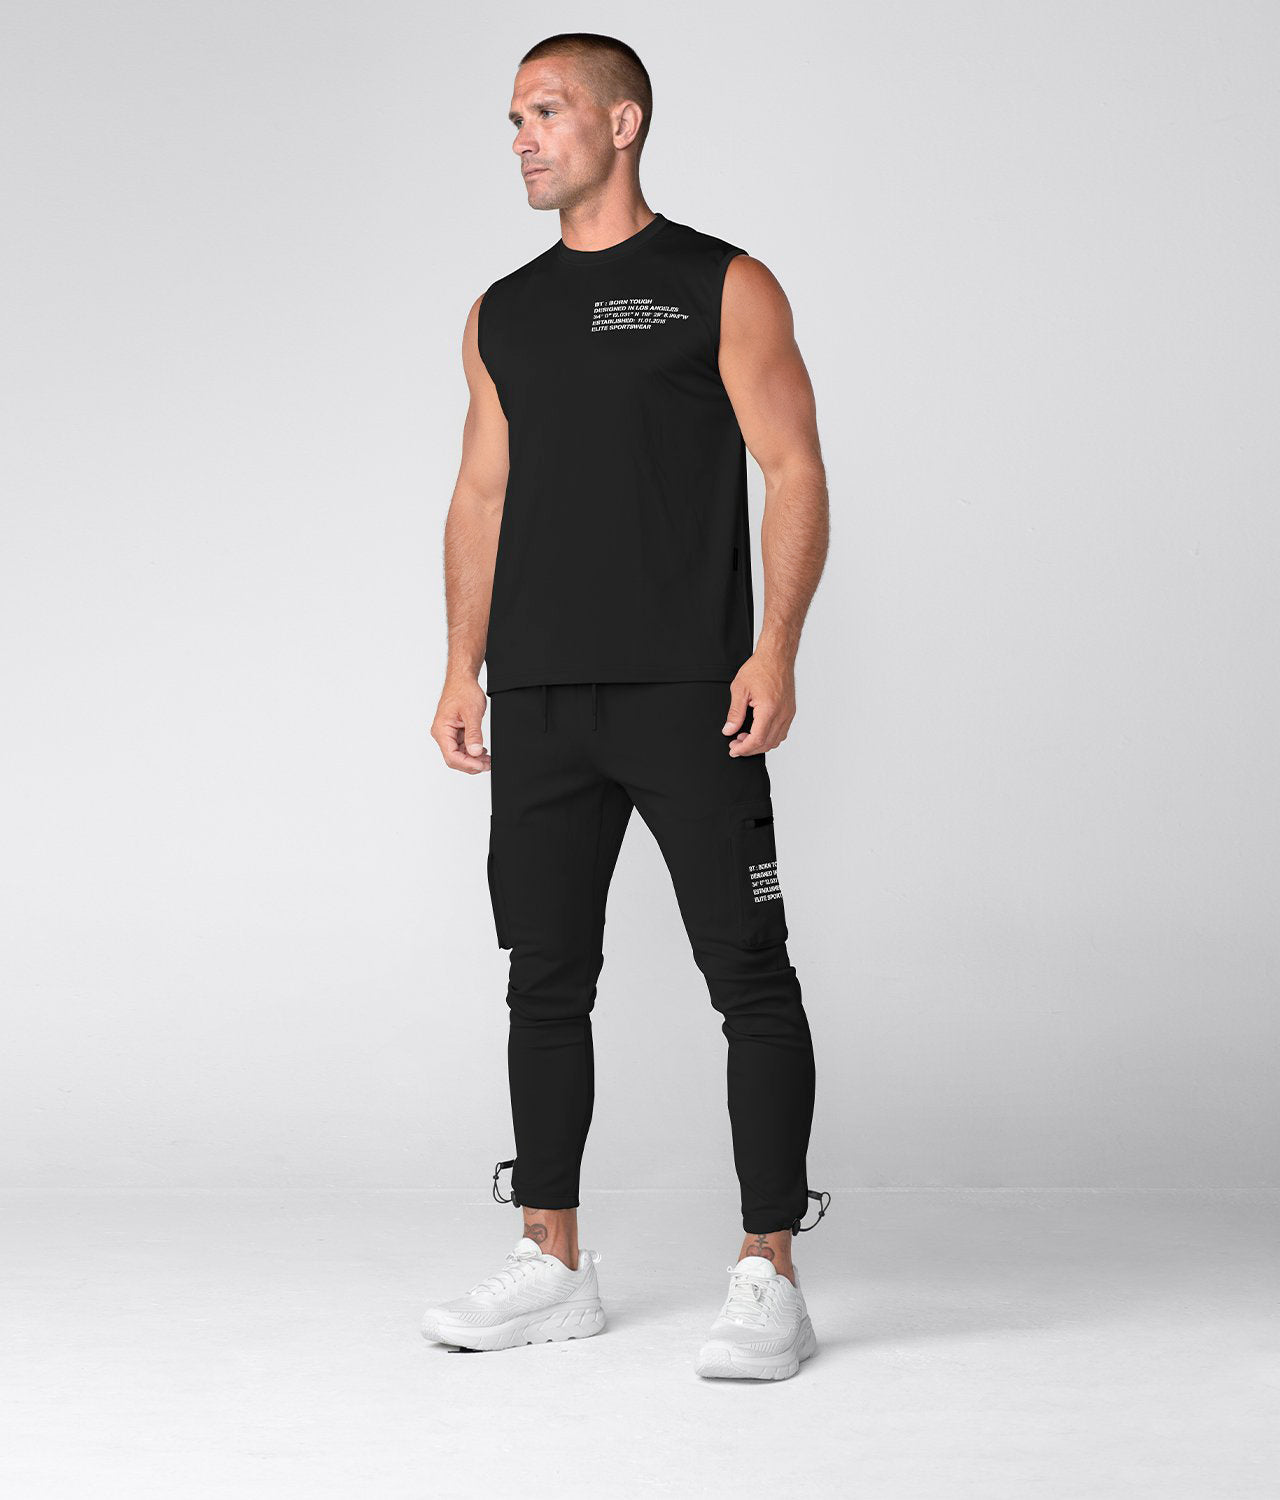 Born Tough Momentum Sleeveless Fitted Black Gym Workout Tee Shirt For Men